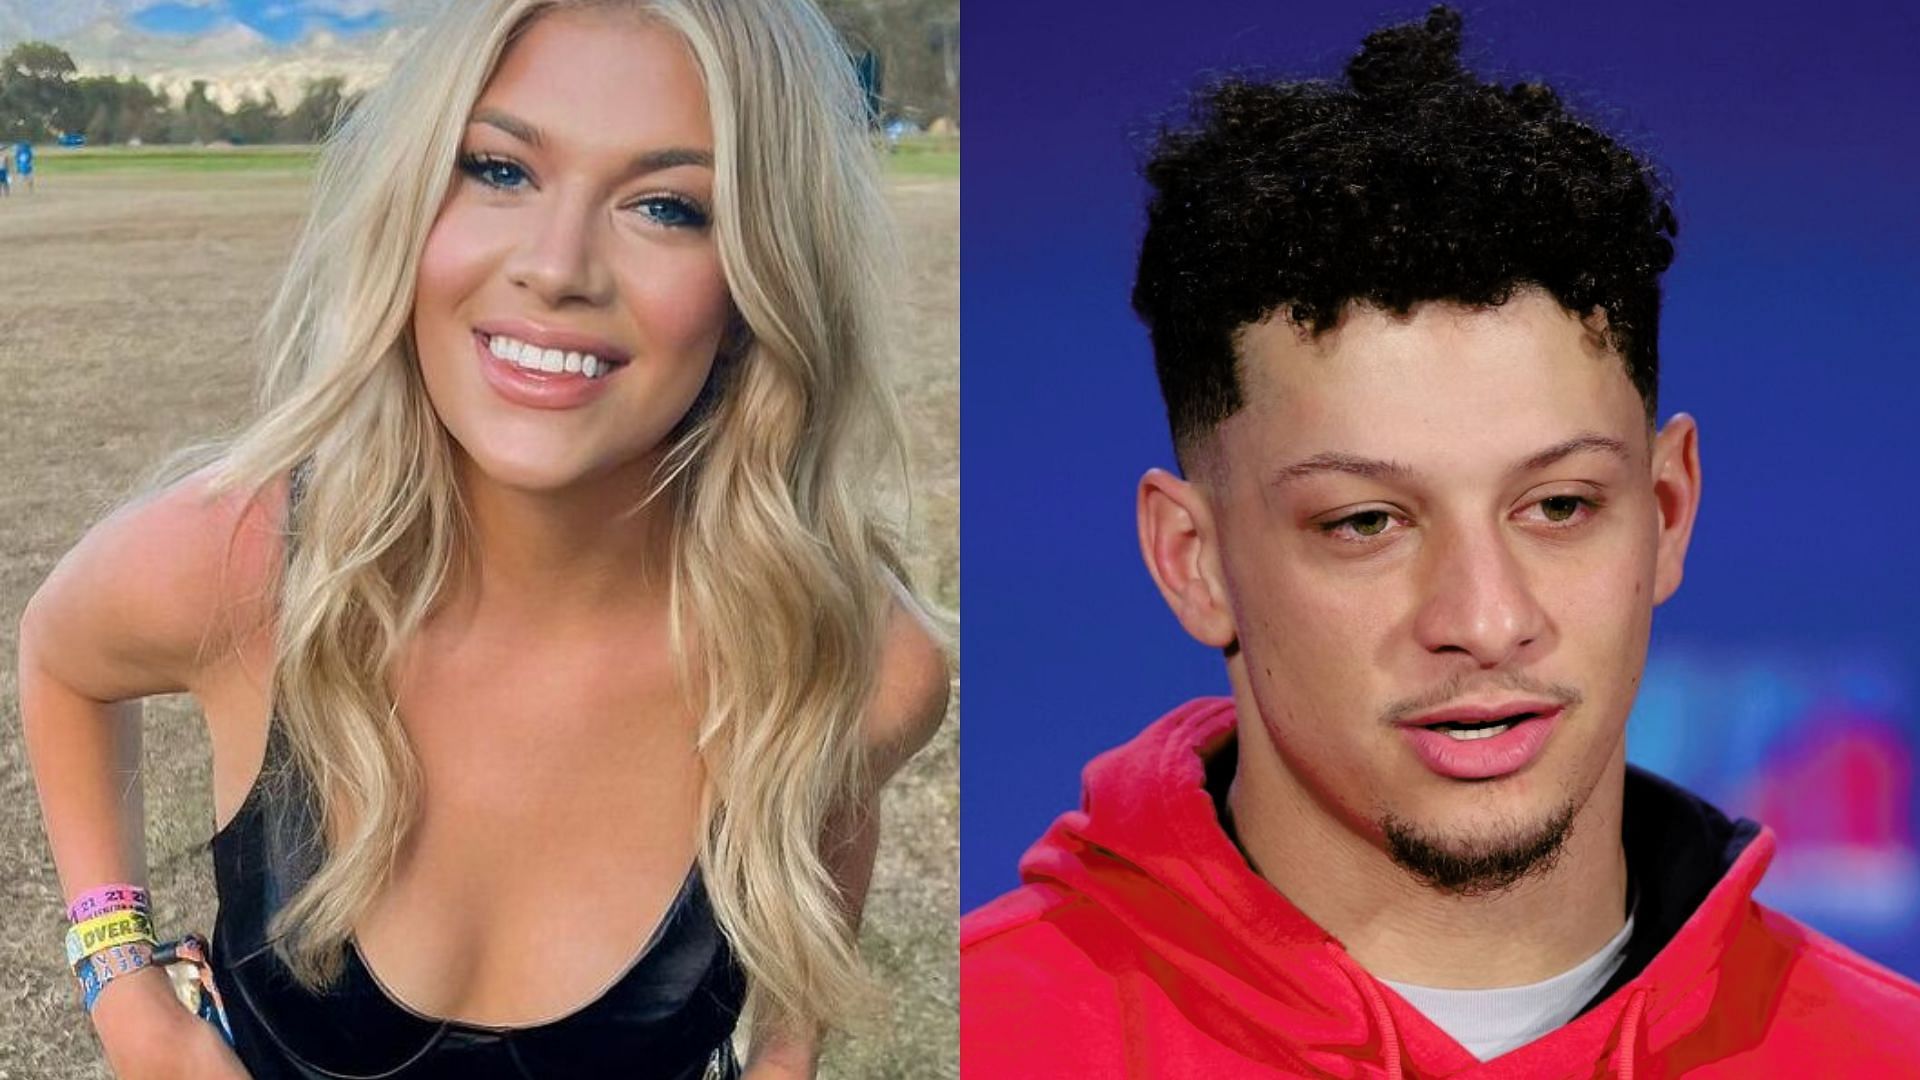 Arizona Sports Director of Social Media Makayla Perkins is going viral for her response to Patrick Mahomes